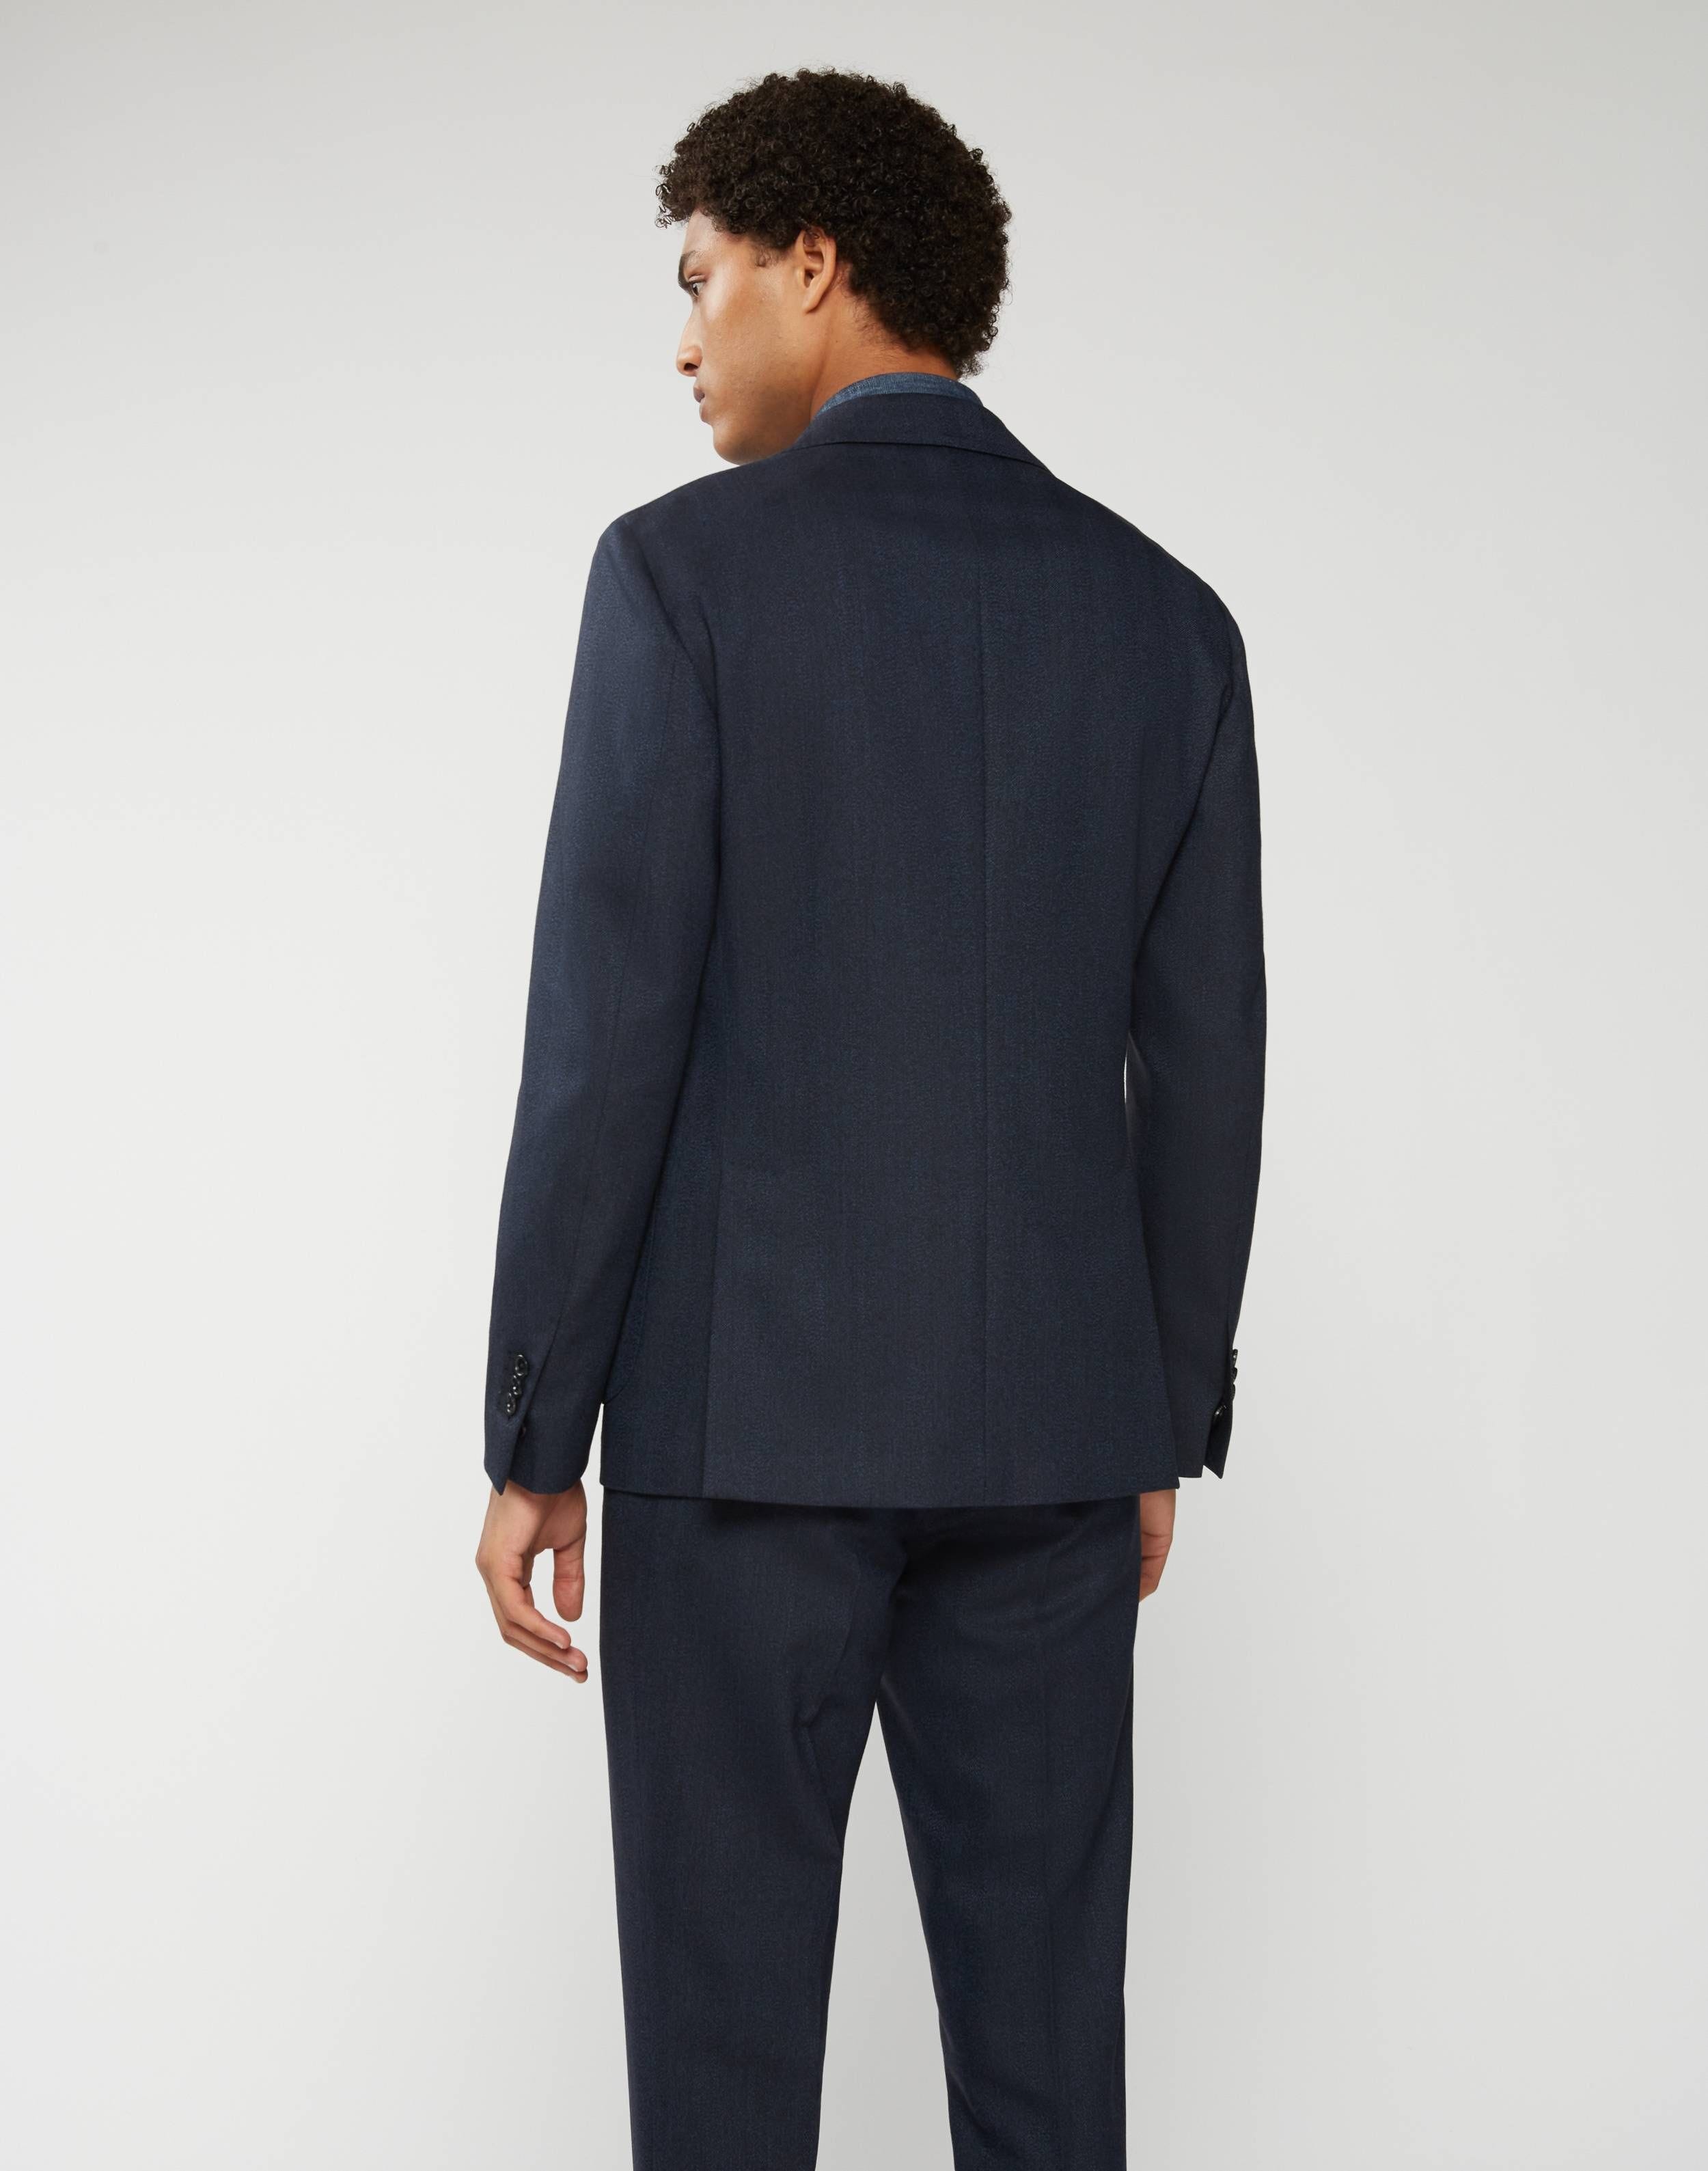 Crease-resistant jacket in two different shades of blue - Easy Wear